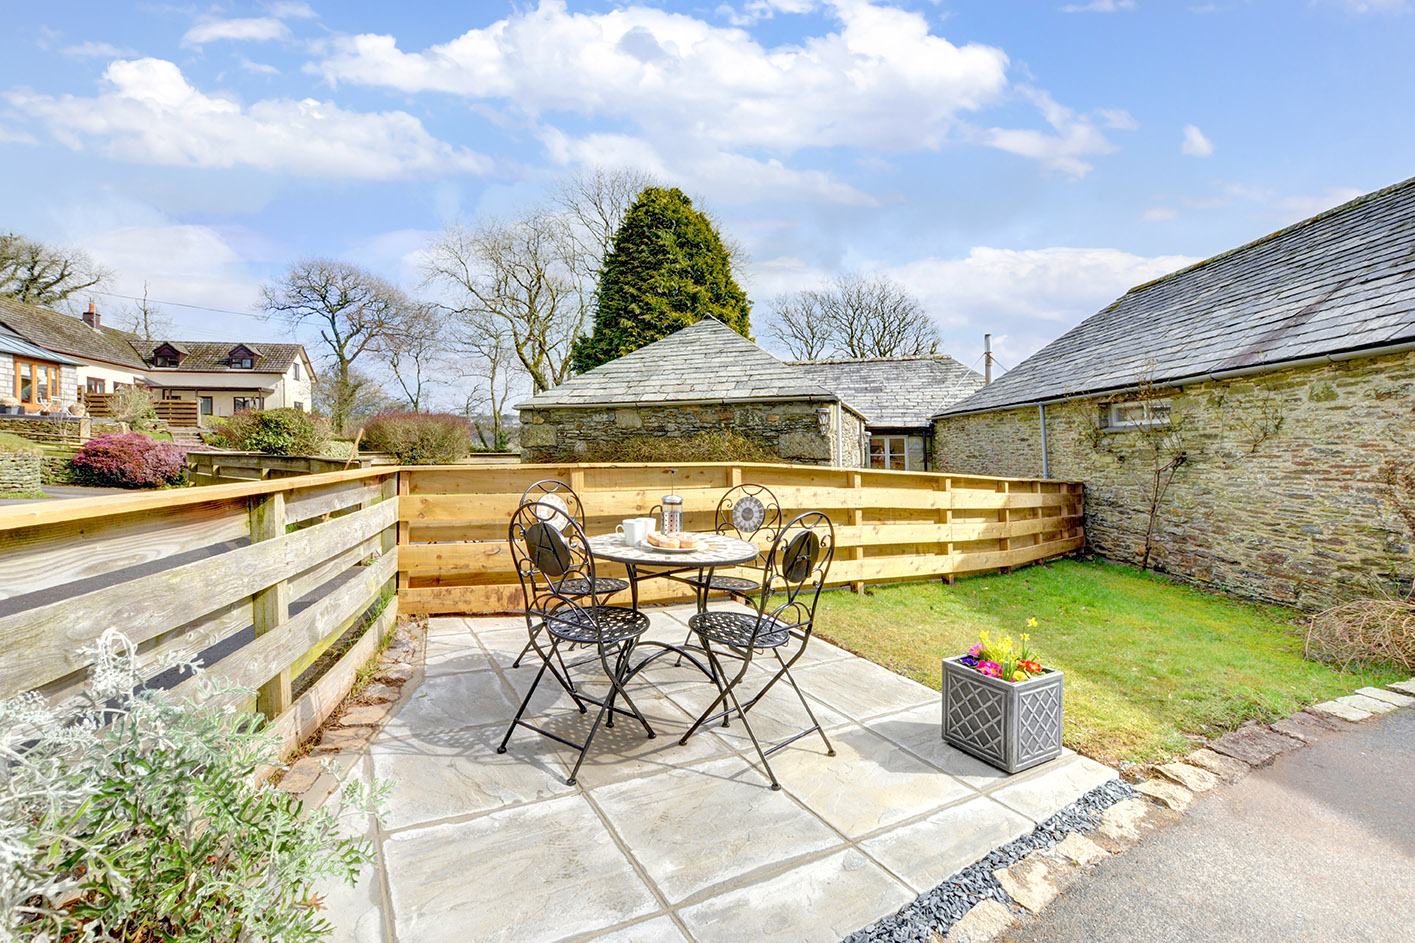 The patio and garden area outside of Otterbridge luxury self catering converted barn holiday cottage at Penrose Burden in North Cornwall01.jpg